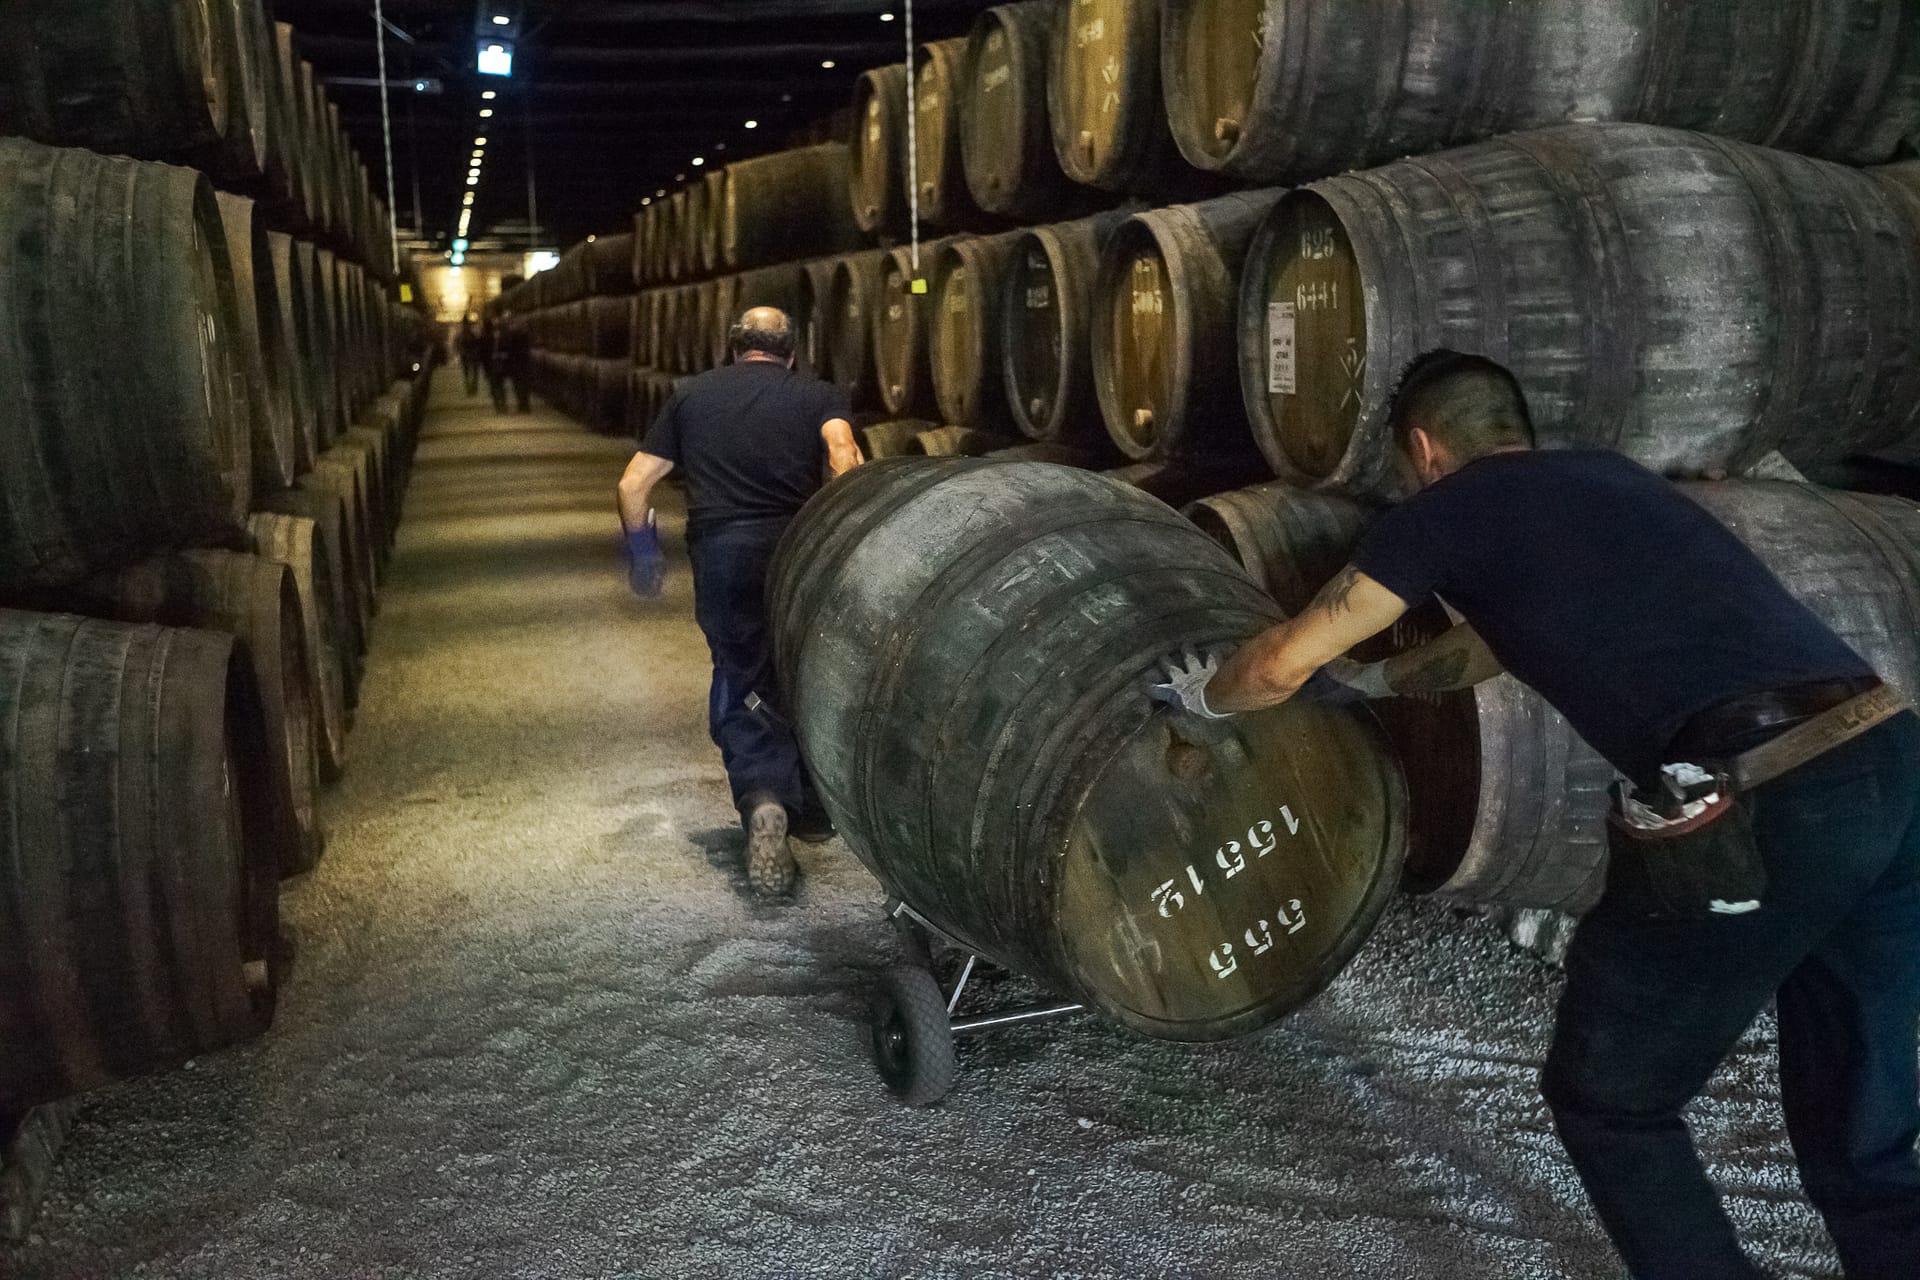 Workers of Portwine storage pull a cask with wine.